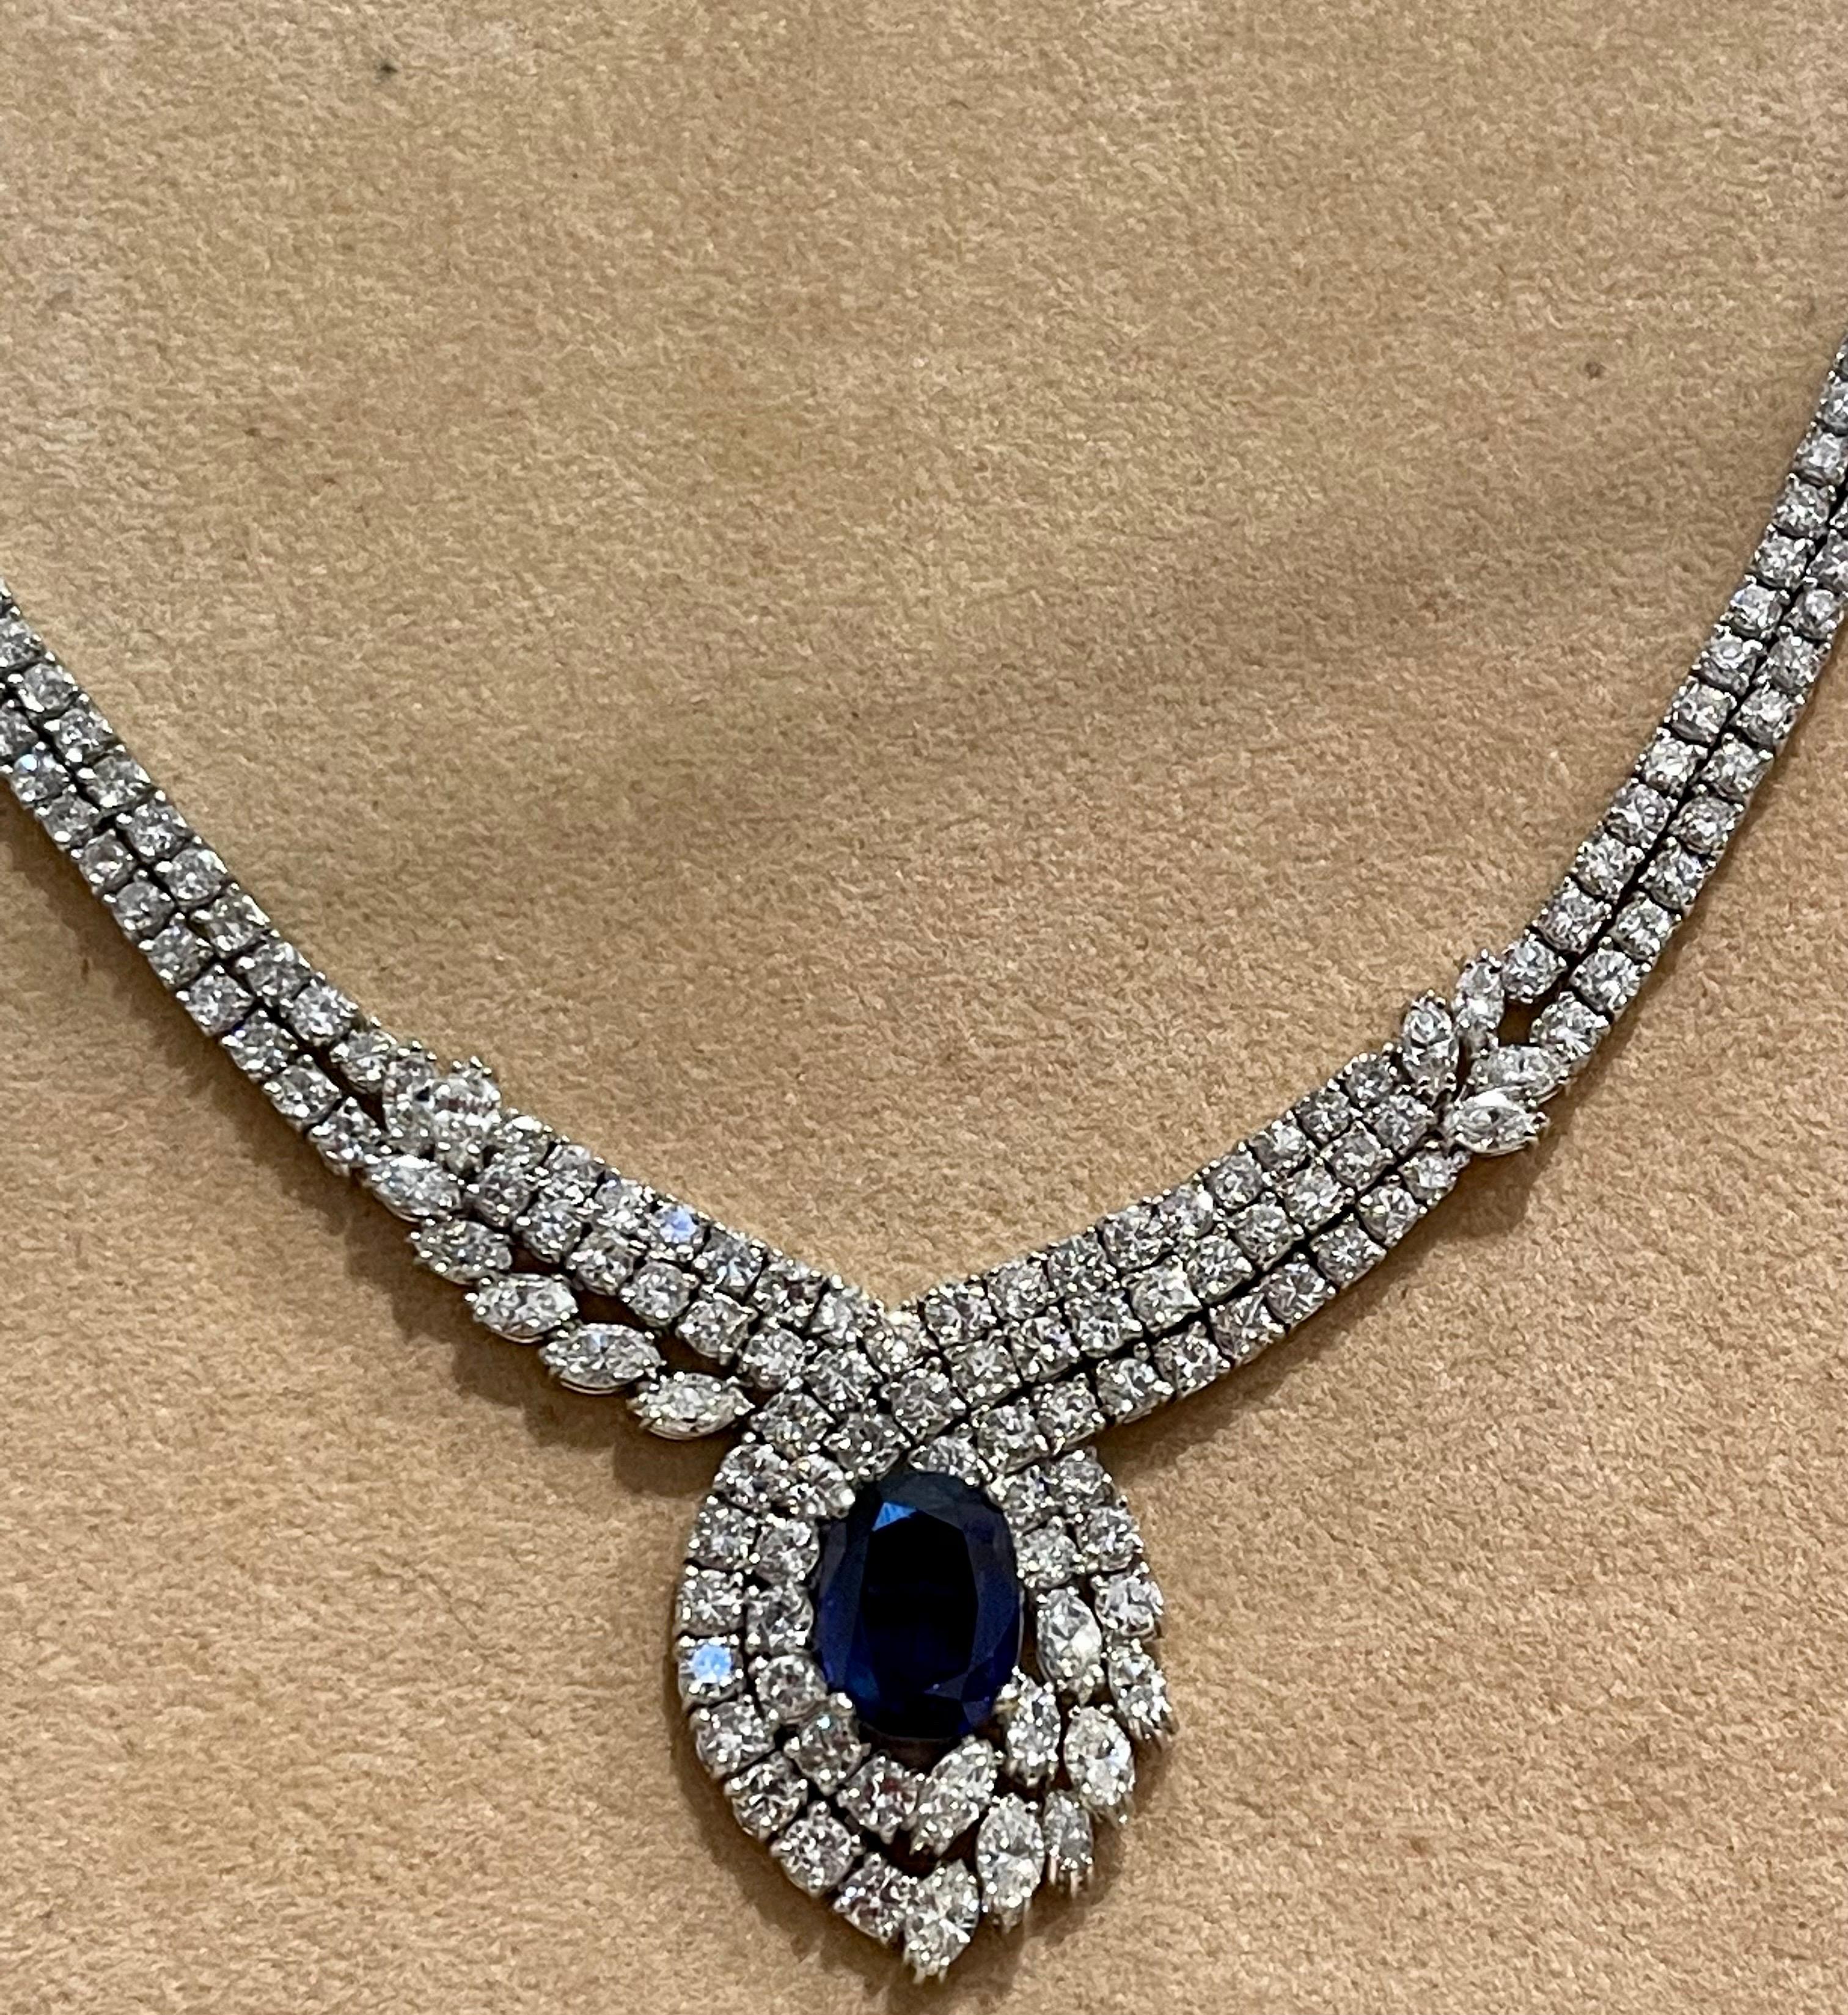 Vintage GIA Certified 6.5Ct Ceylon Sapphire & 32 Ct Diamond Necklace 18K W Gold For Sale 2